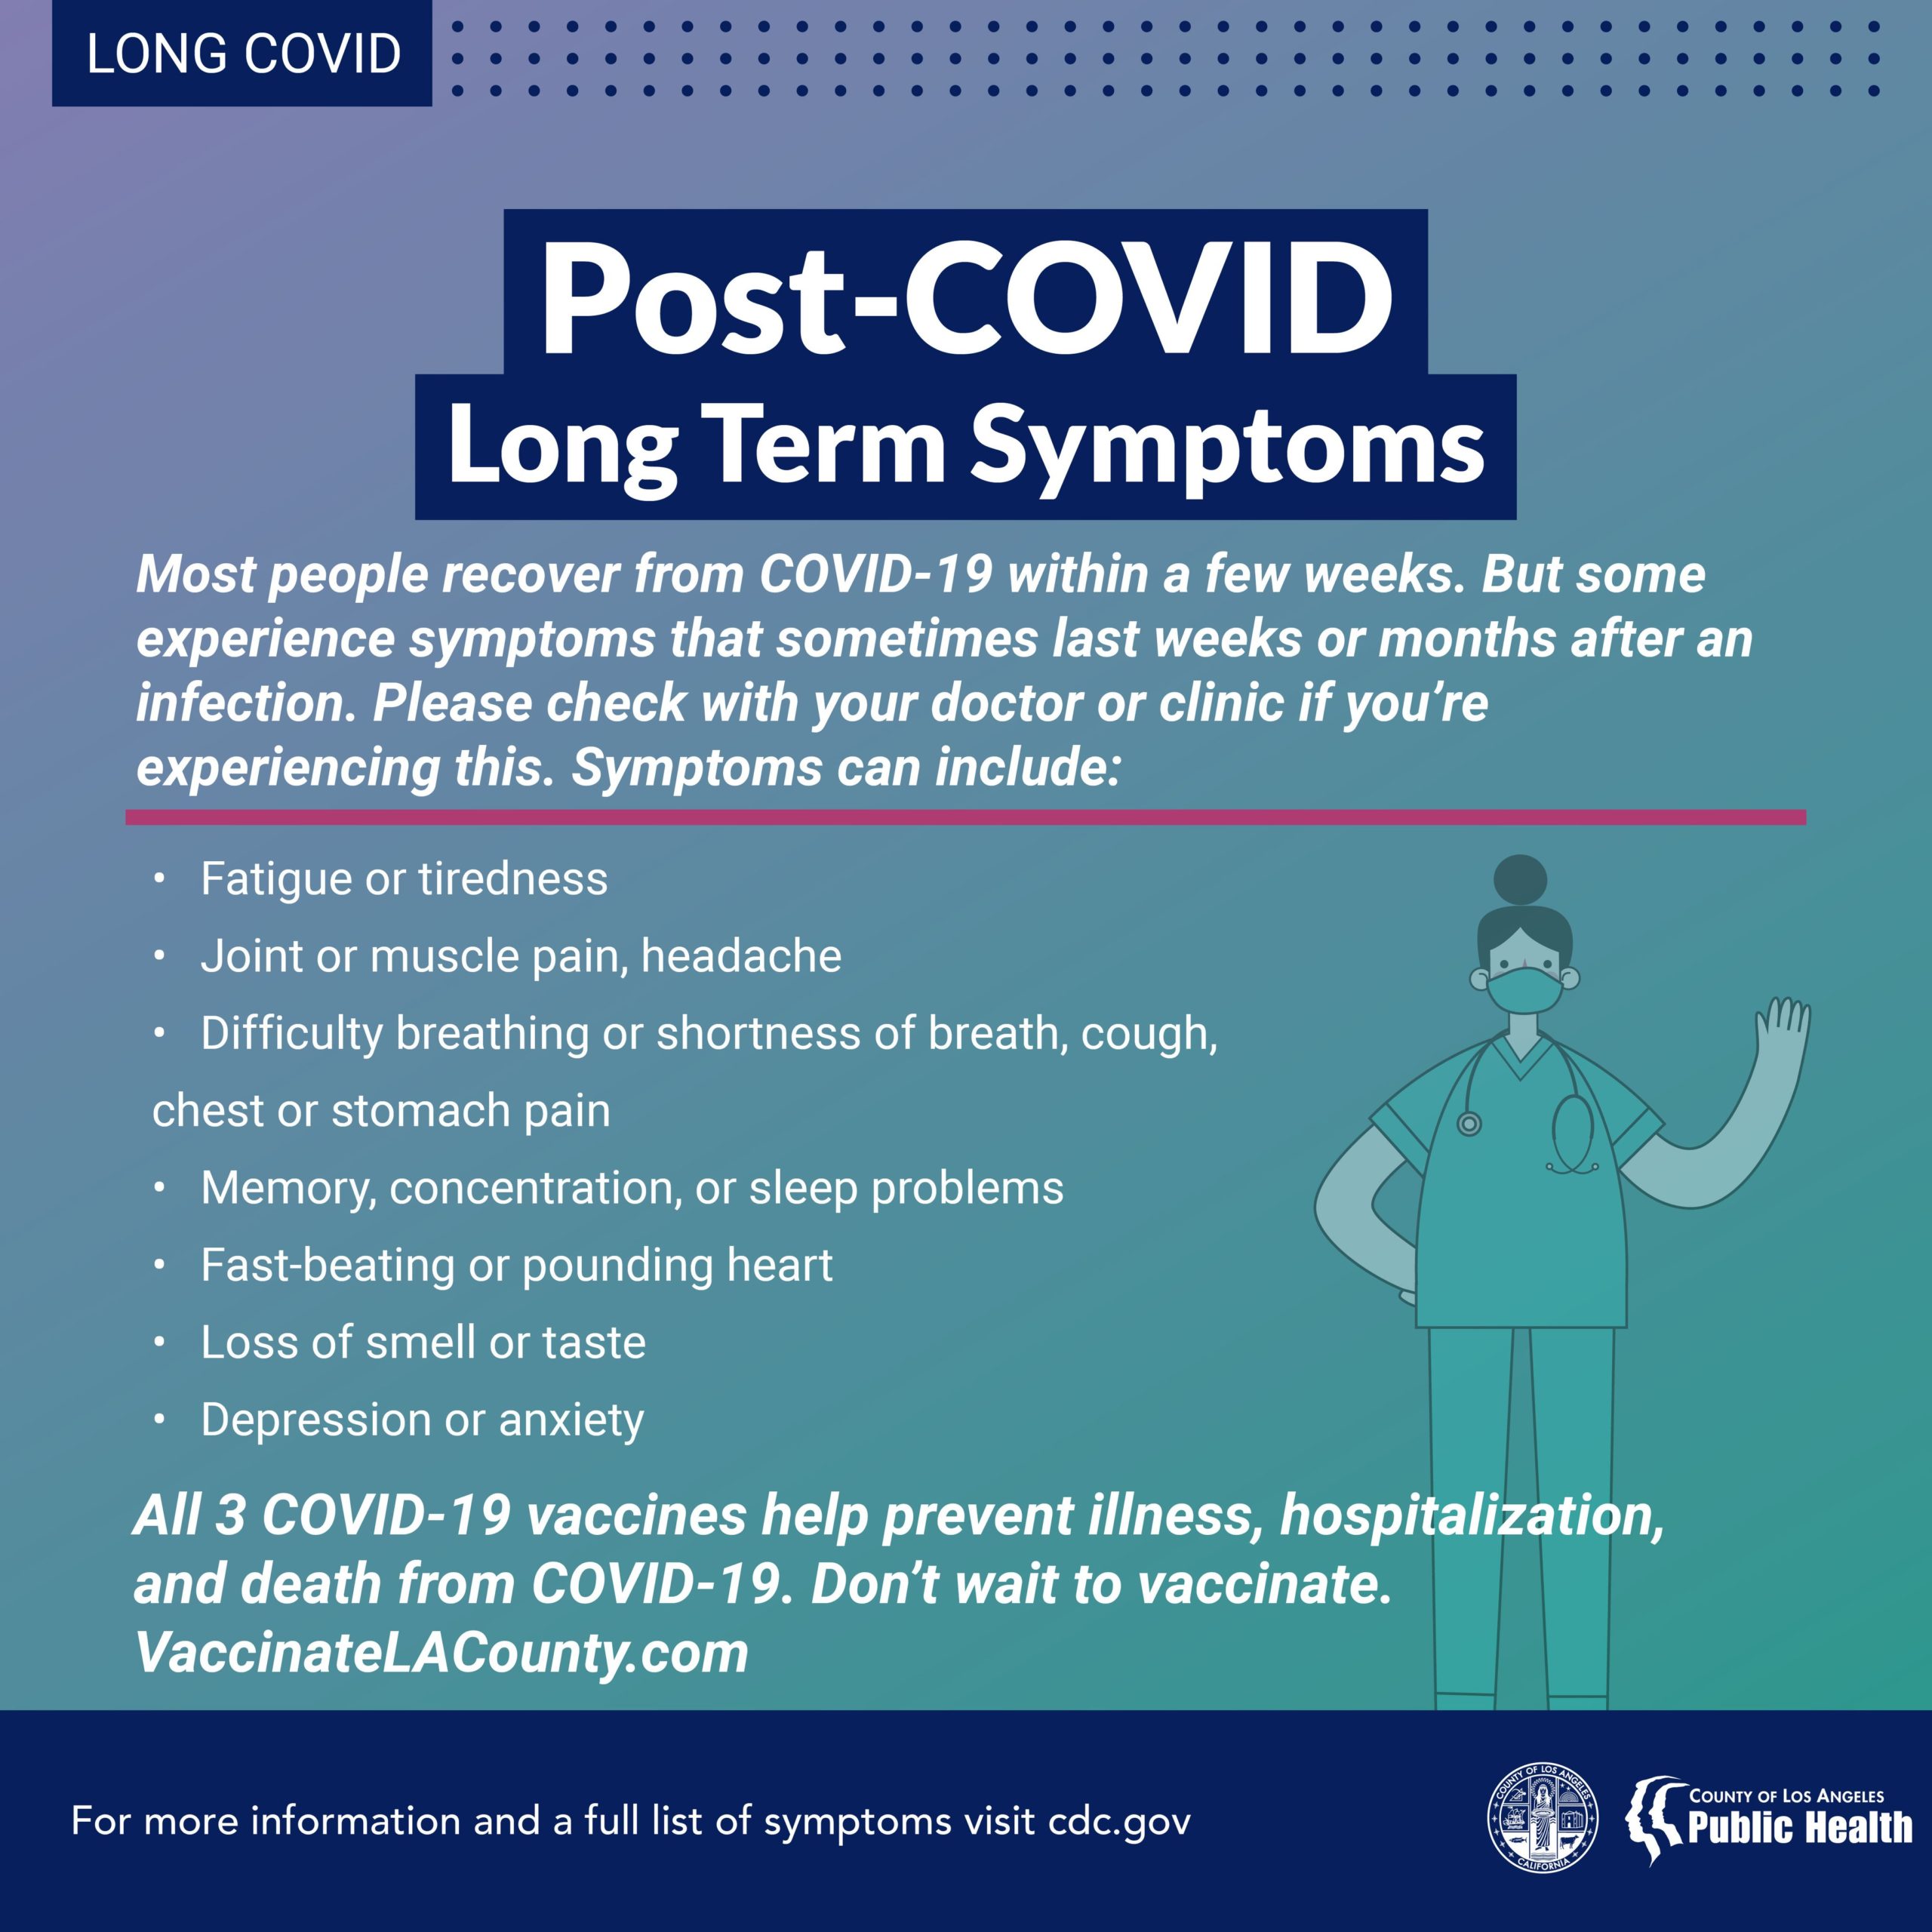 While the CDC and experts around the world learn more about long-term COVID-19 symptoms, the best way to keep you and your family safe is by getting vaccinated. Find a location near you at http://VaccinateLACounty.com For people who don't live in Los Angeles County, go to https://www.vaccinateall58.com/